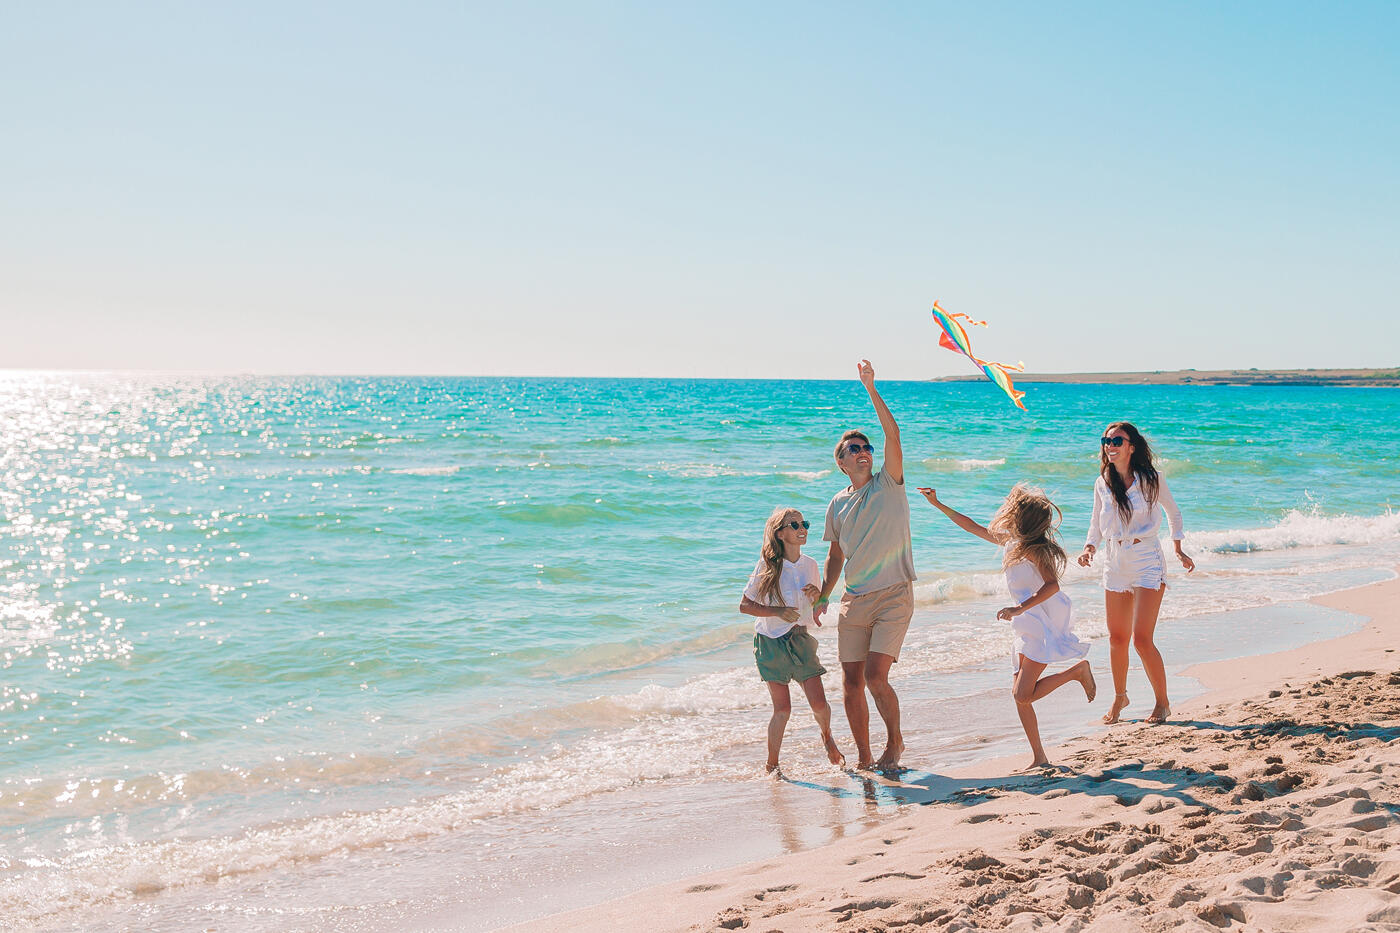 Family playing with a kite on a sunny beach with the turquoise sea in the background during their vacation.